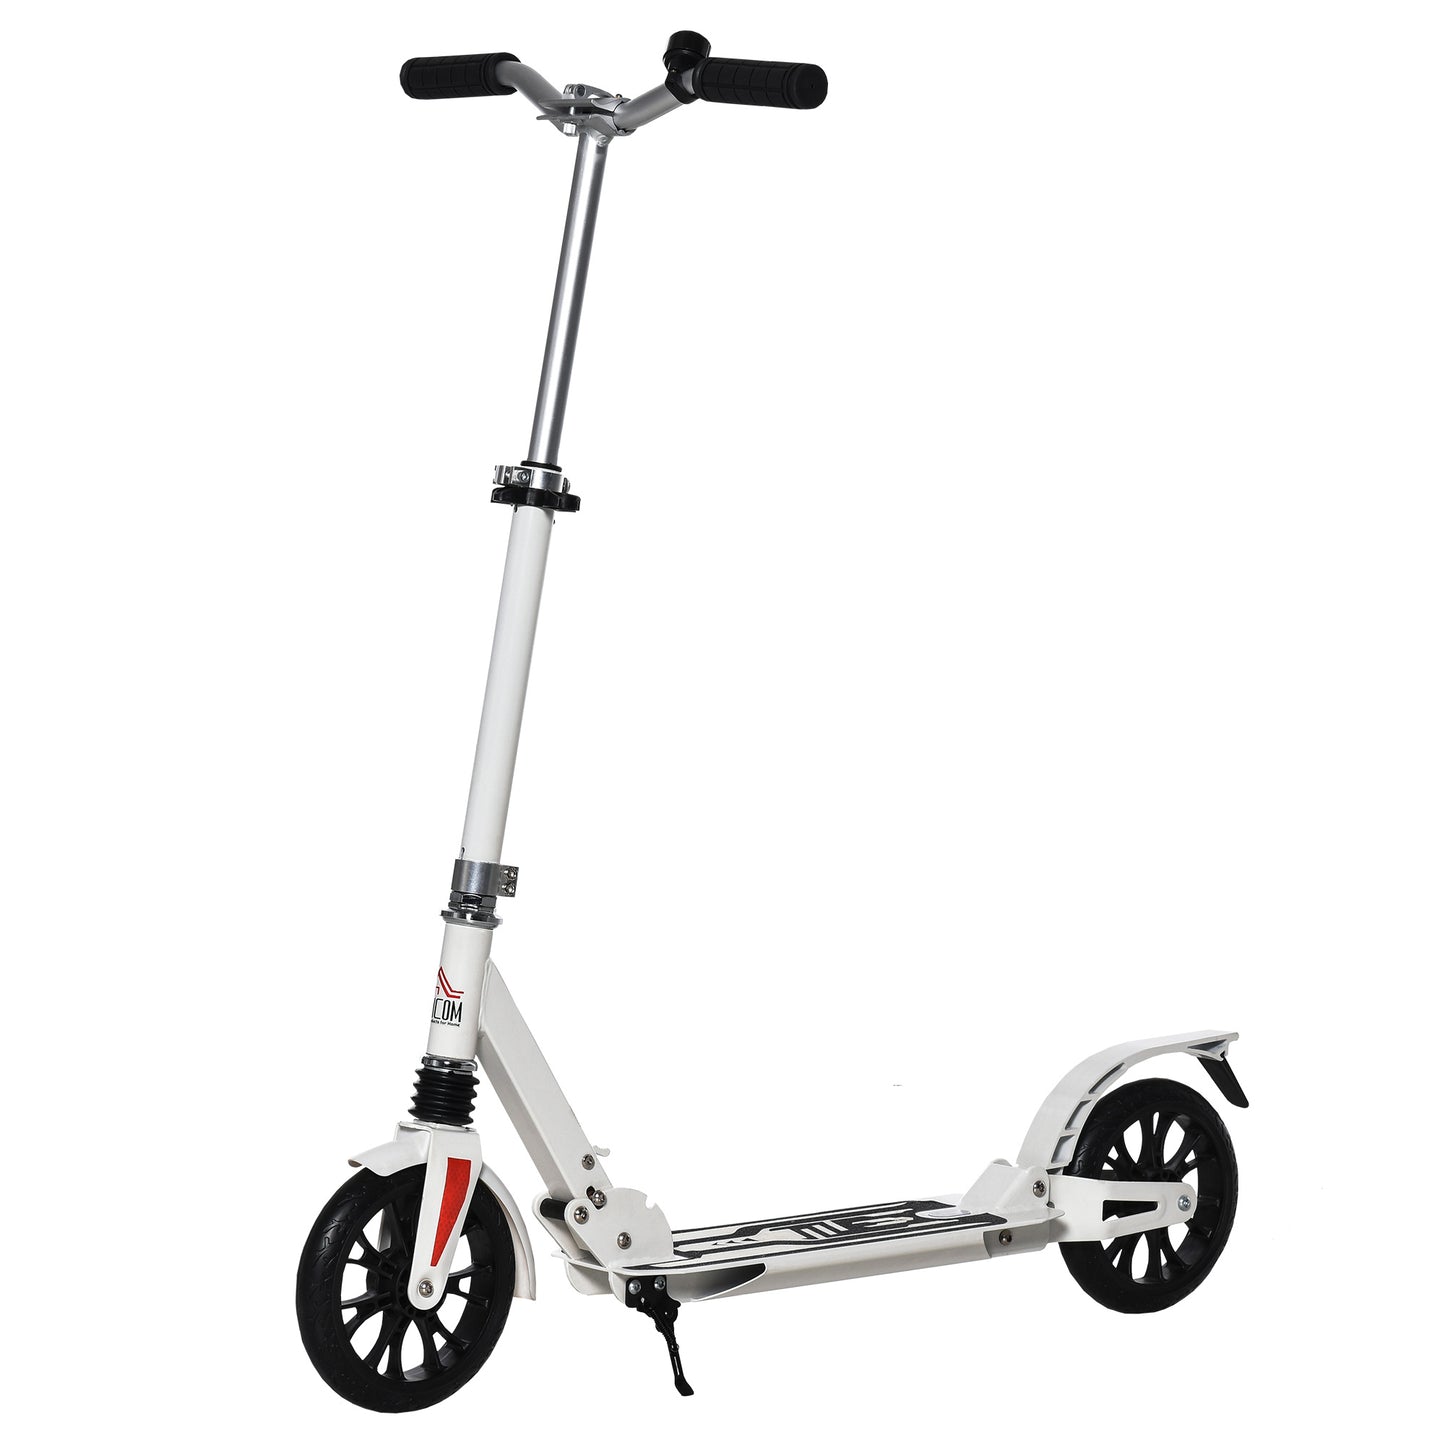 HOMCOM Kick Scooter Adjustable Foldable w/ Foot Brak and Manual Bell for Ages 14+